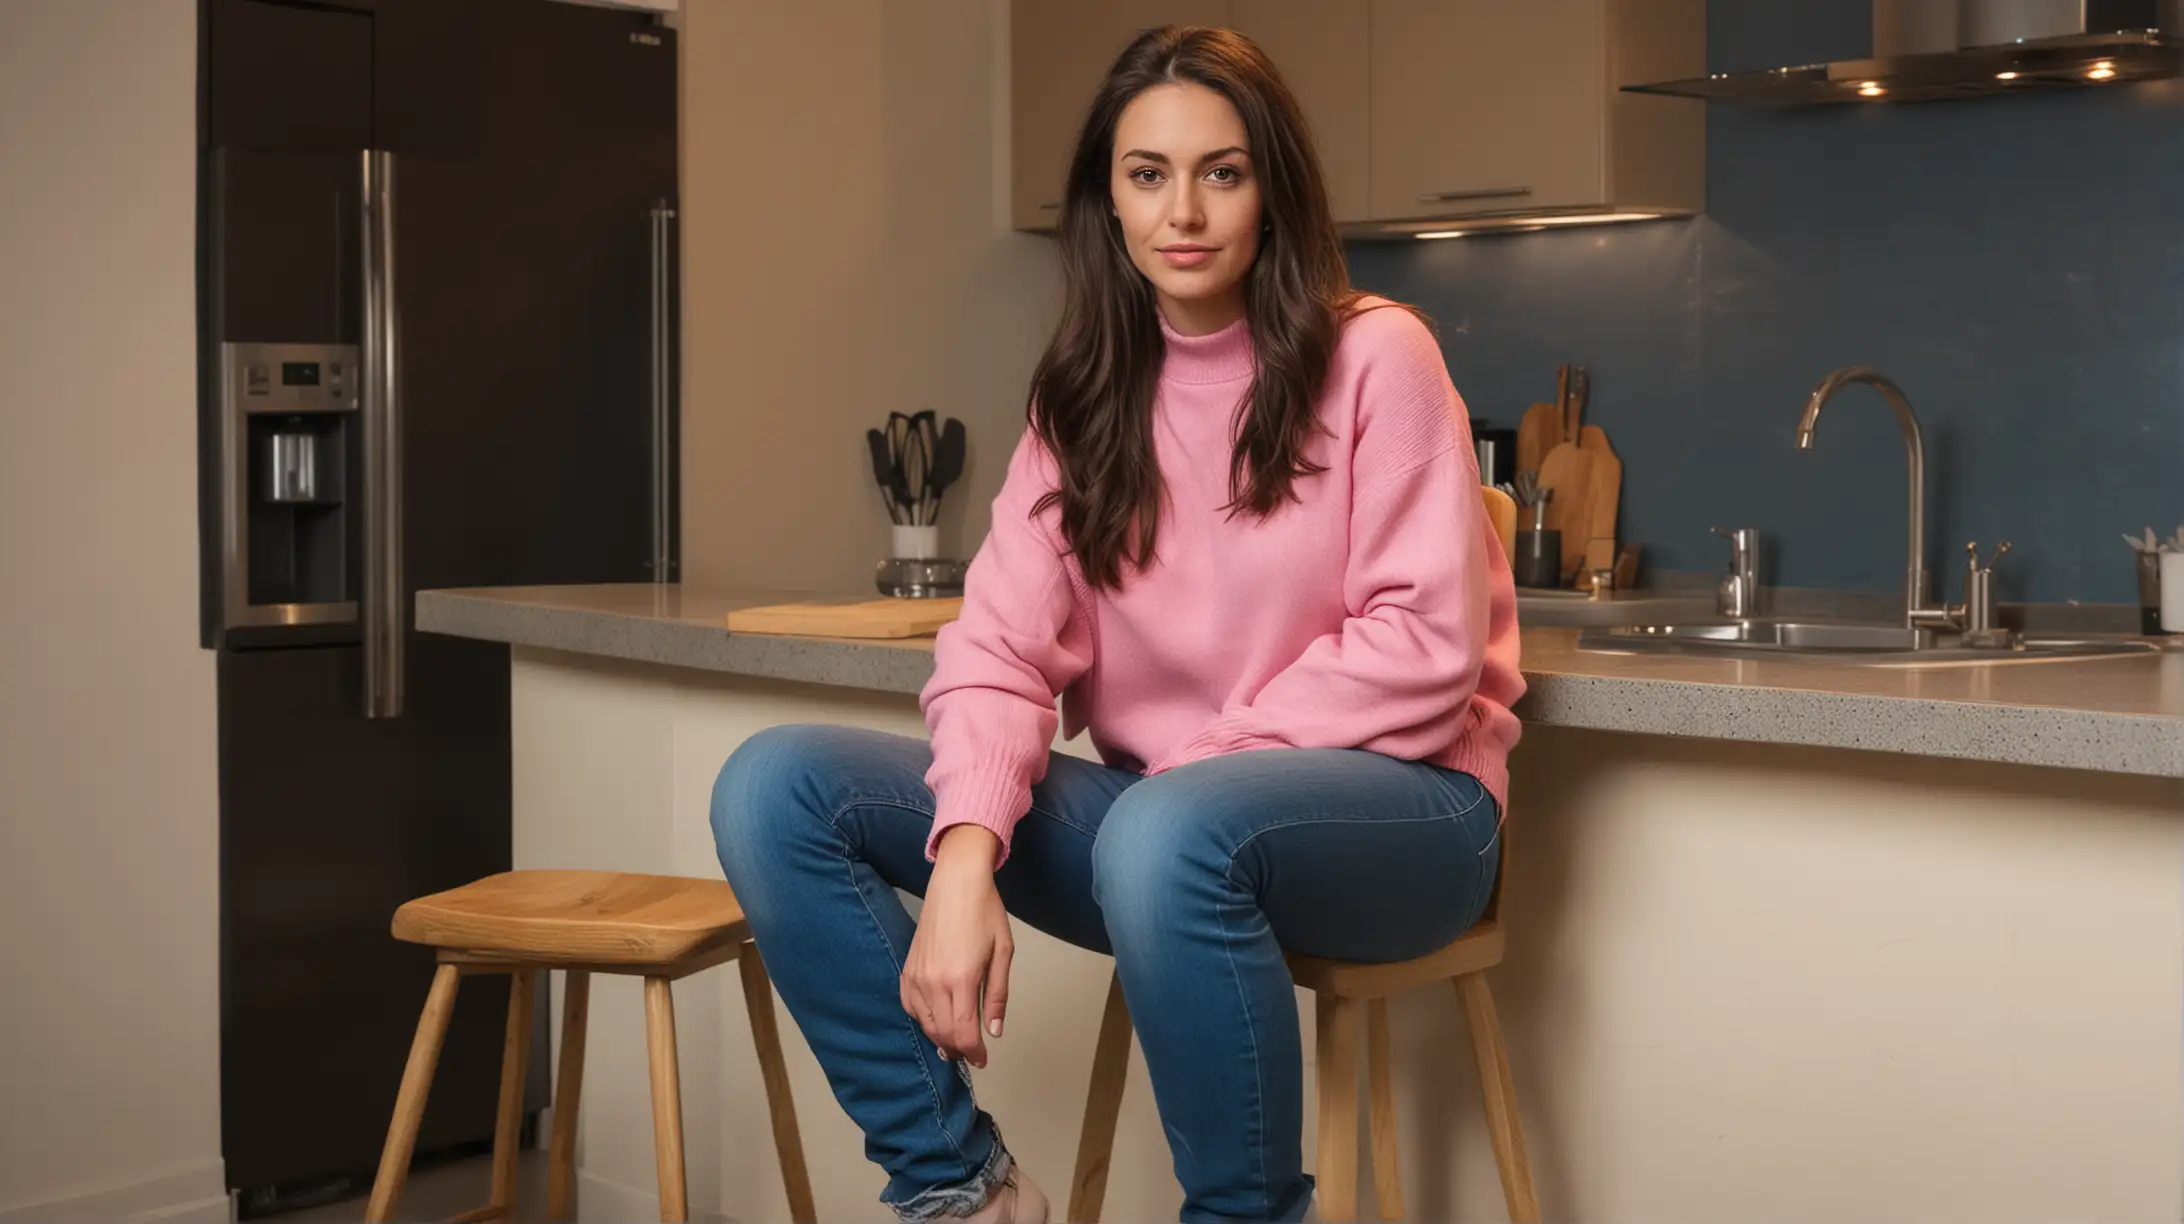 30 year old white woman with long dark brown hair, wearing a pink sweater and blue jeans, sitting on a stool, modern apartment kitchen, urban high rise background at night